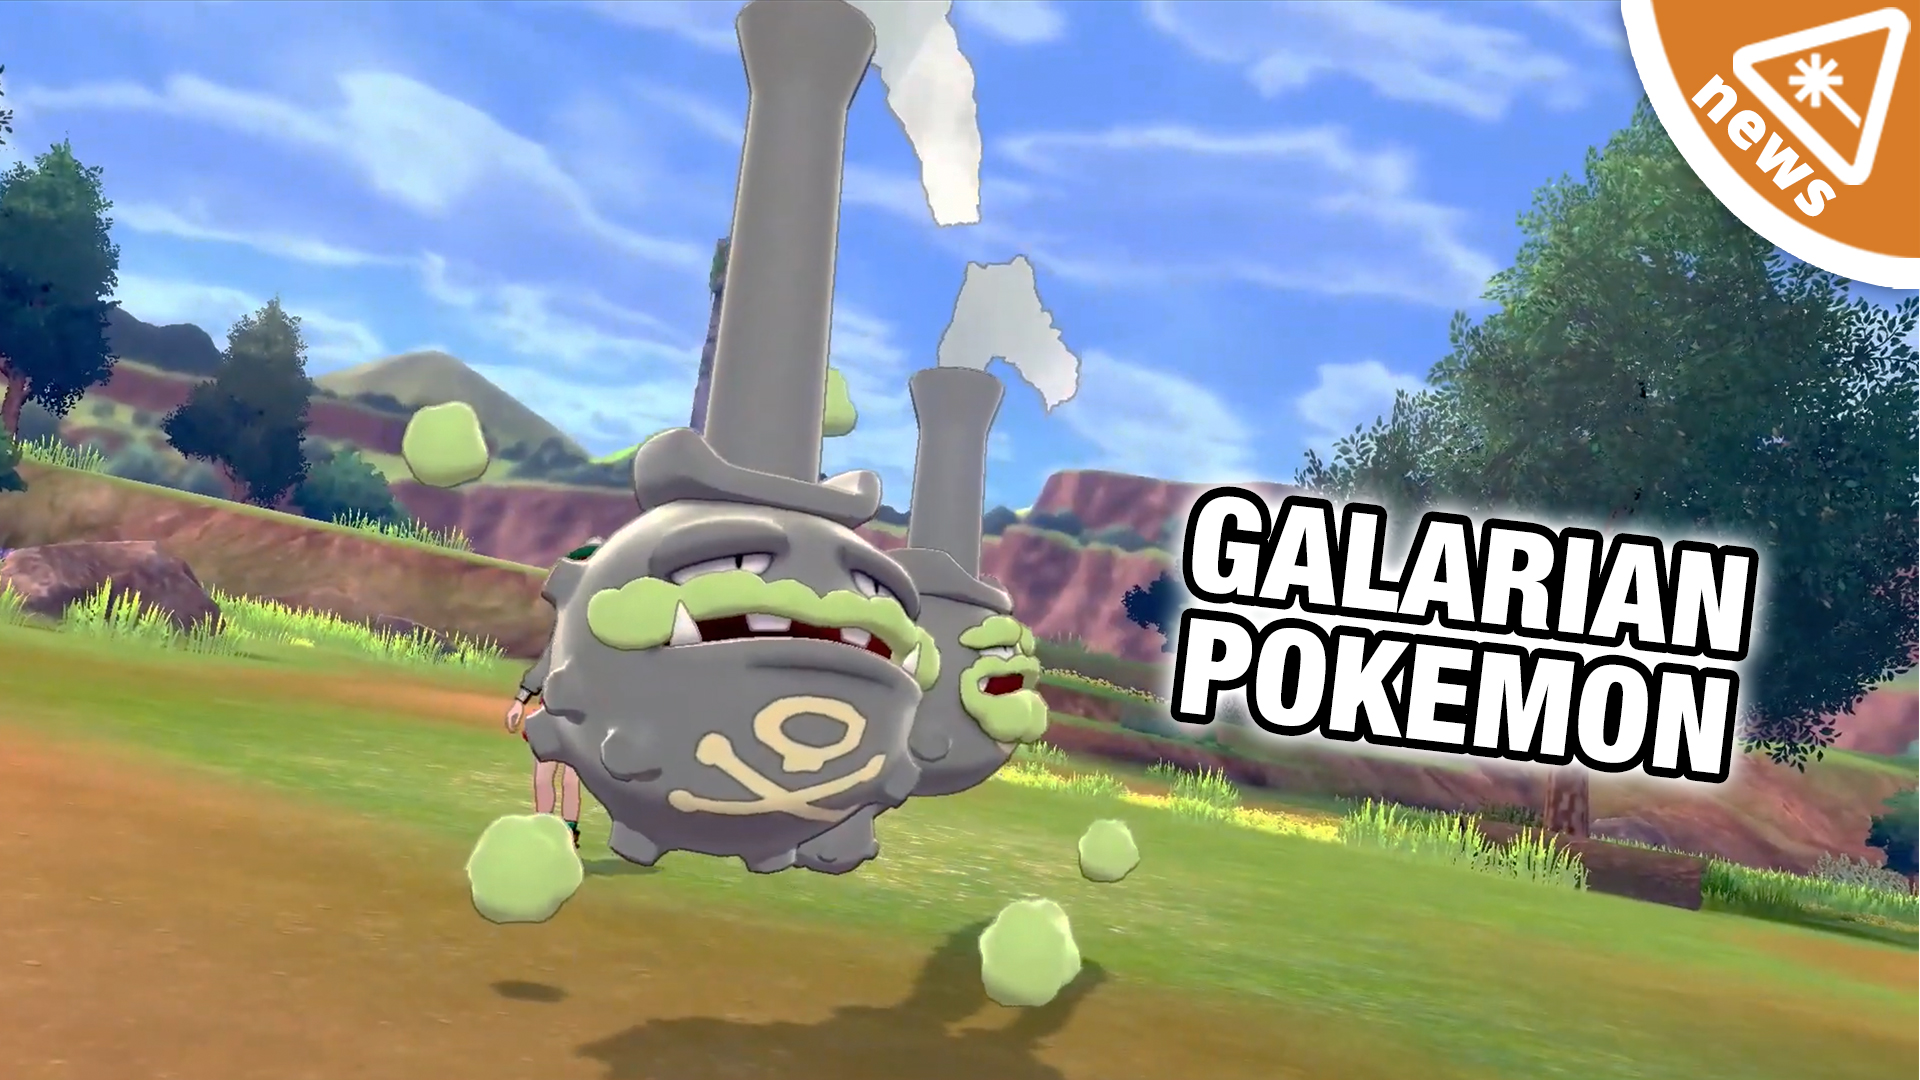 Weezing Hd Wallpapers